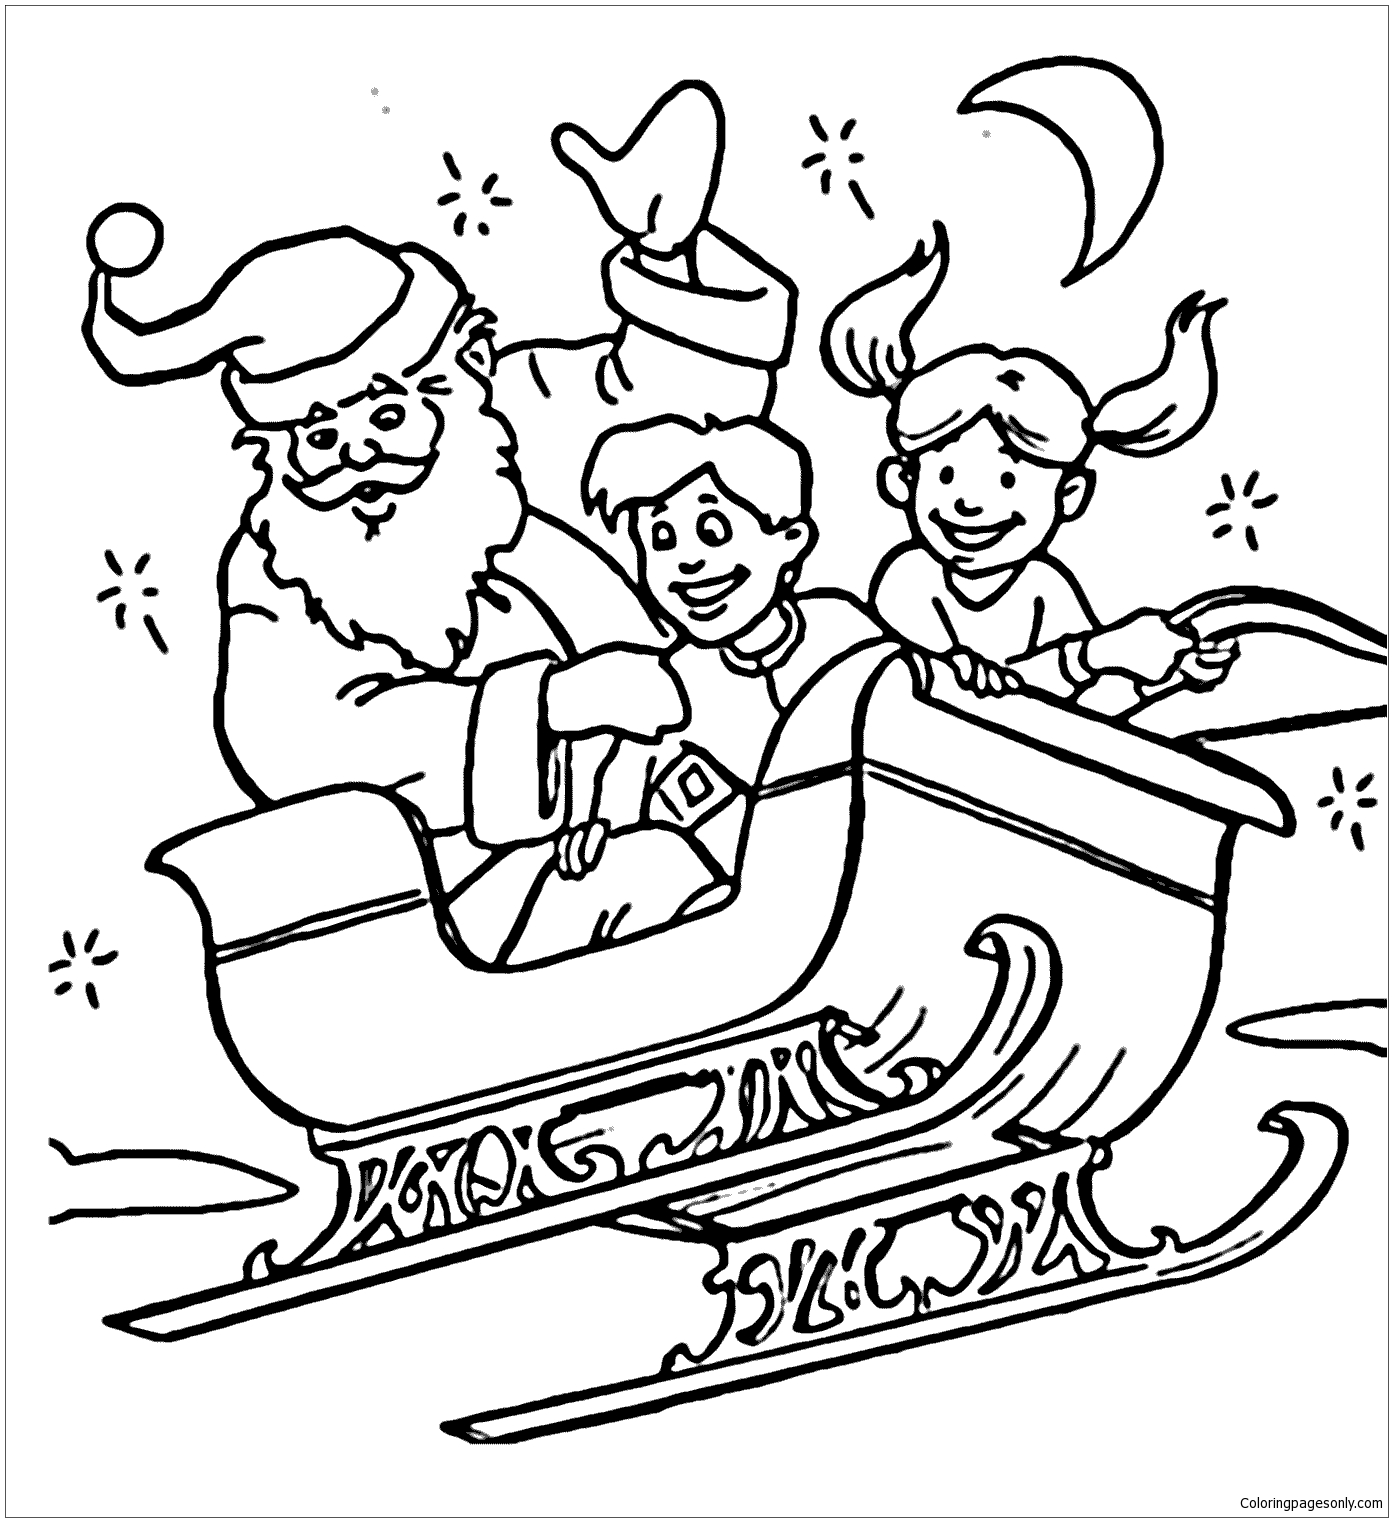 Santa Claus And Children Flying in Sleigh from Santa Claus